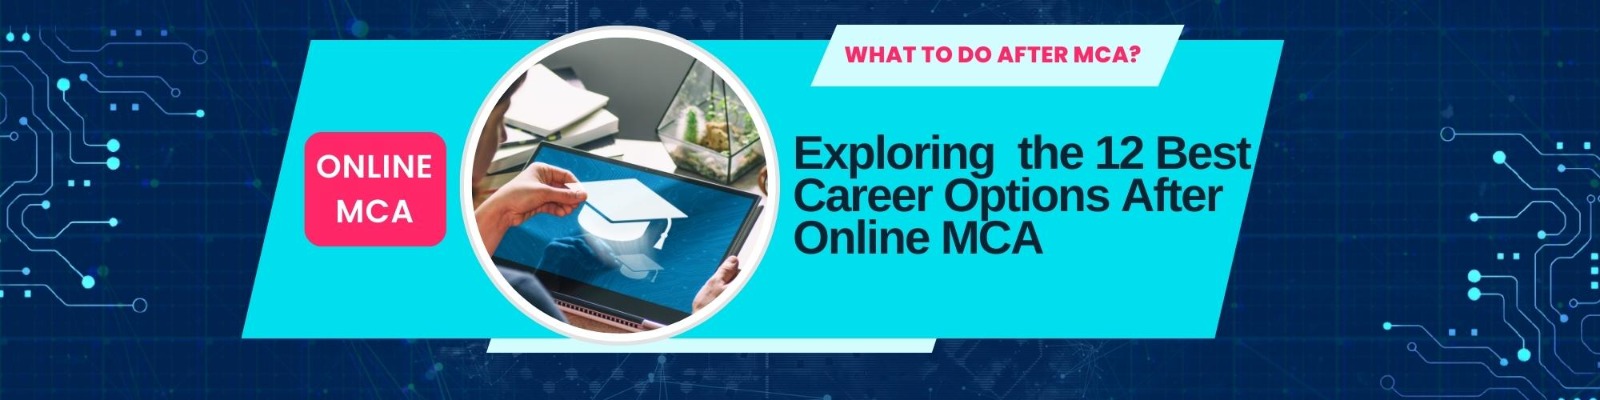 What to Do After MCA? Exploring the 12 Best Career Options After Online MCA | Edubuild Learning